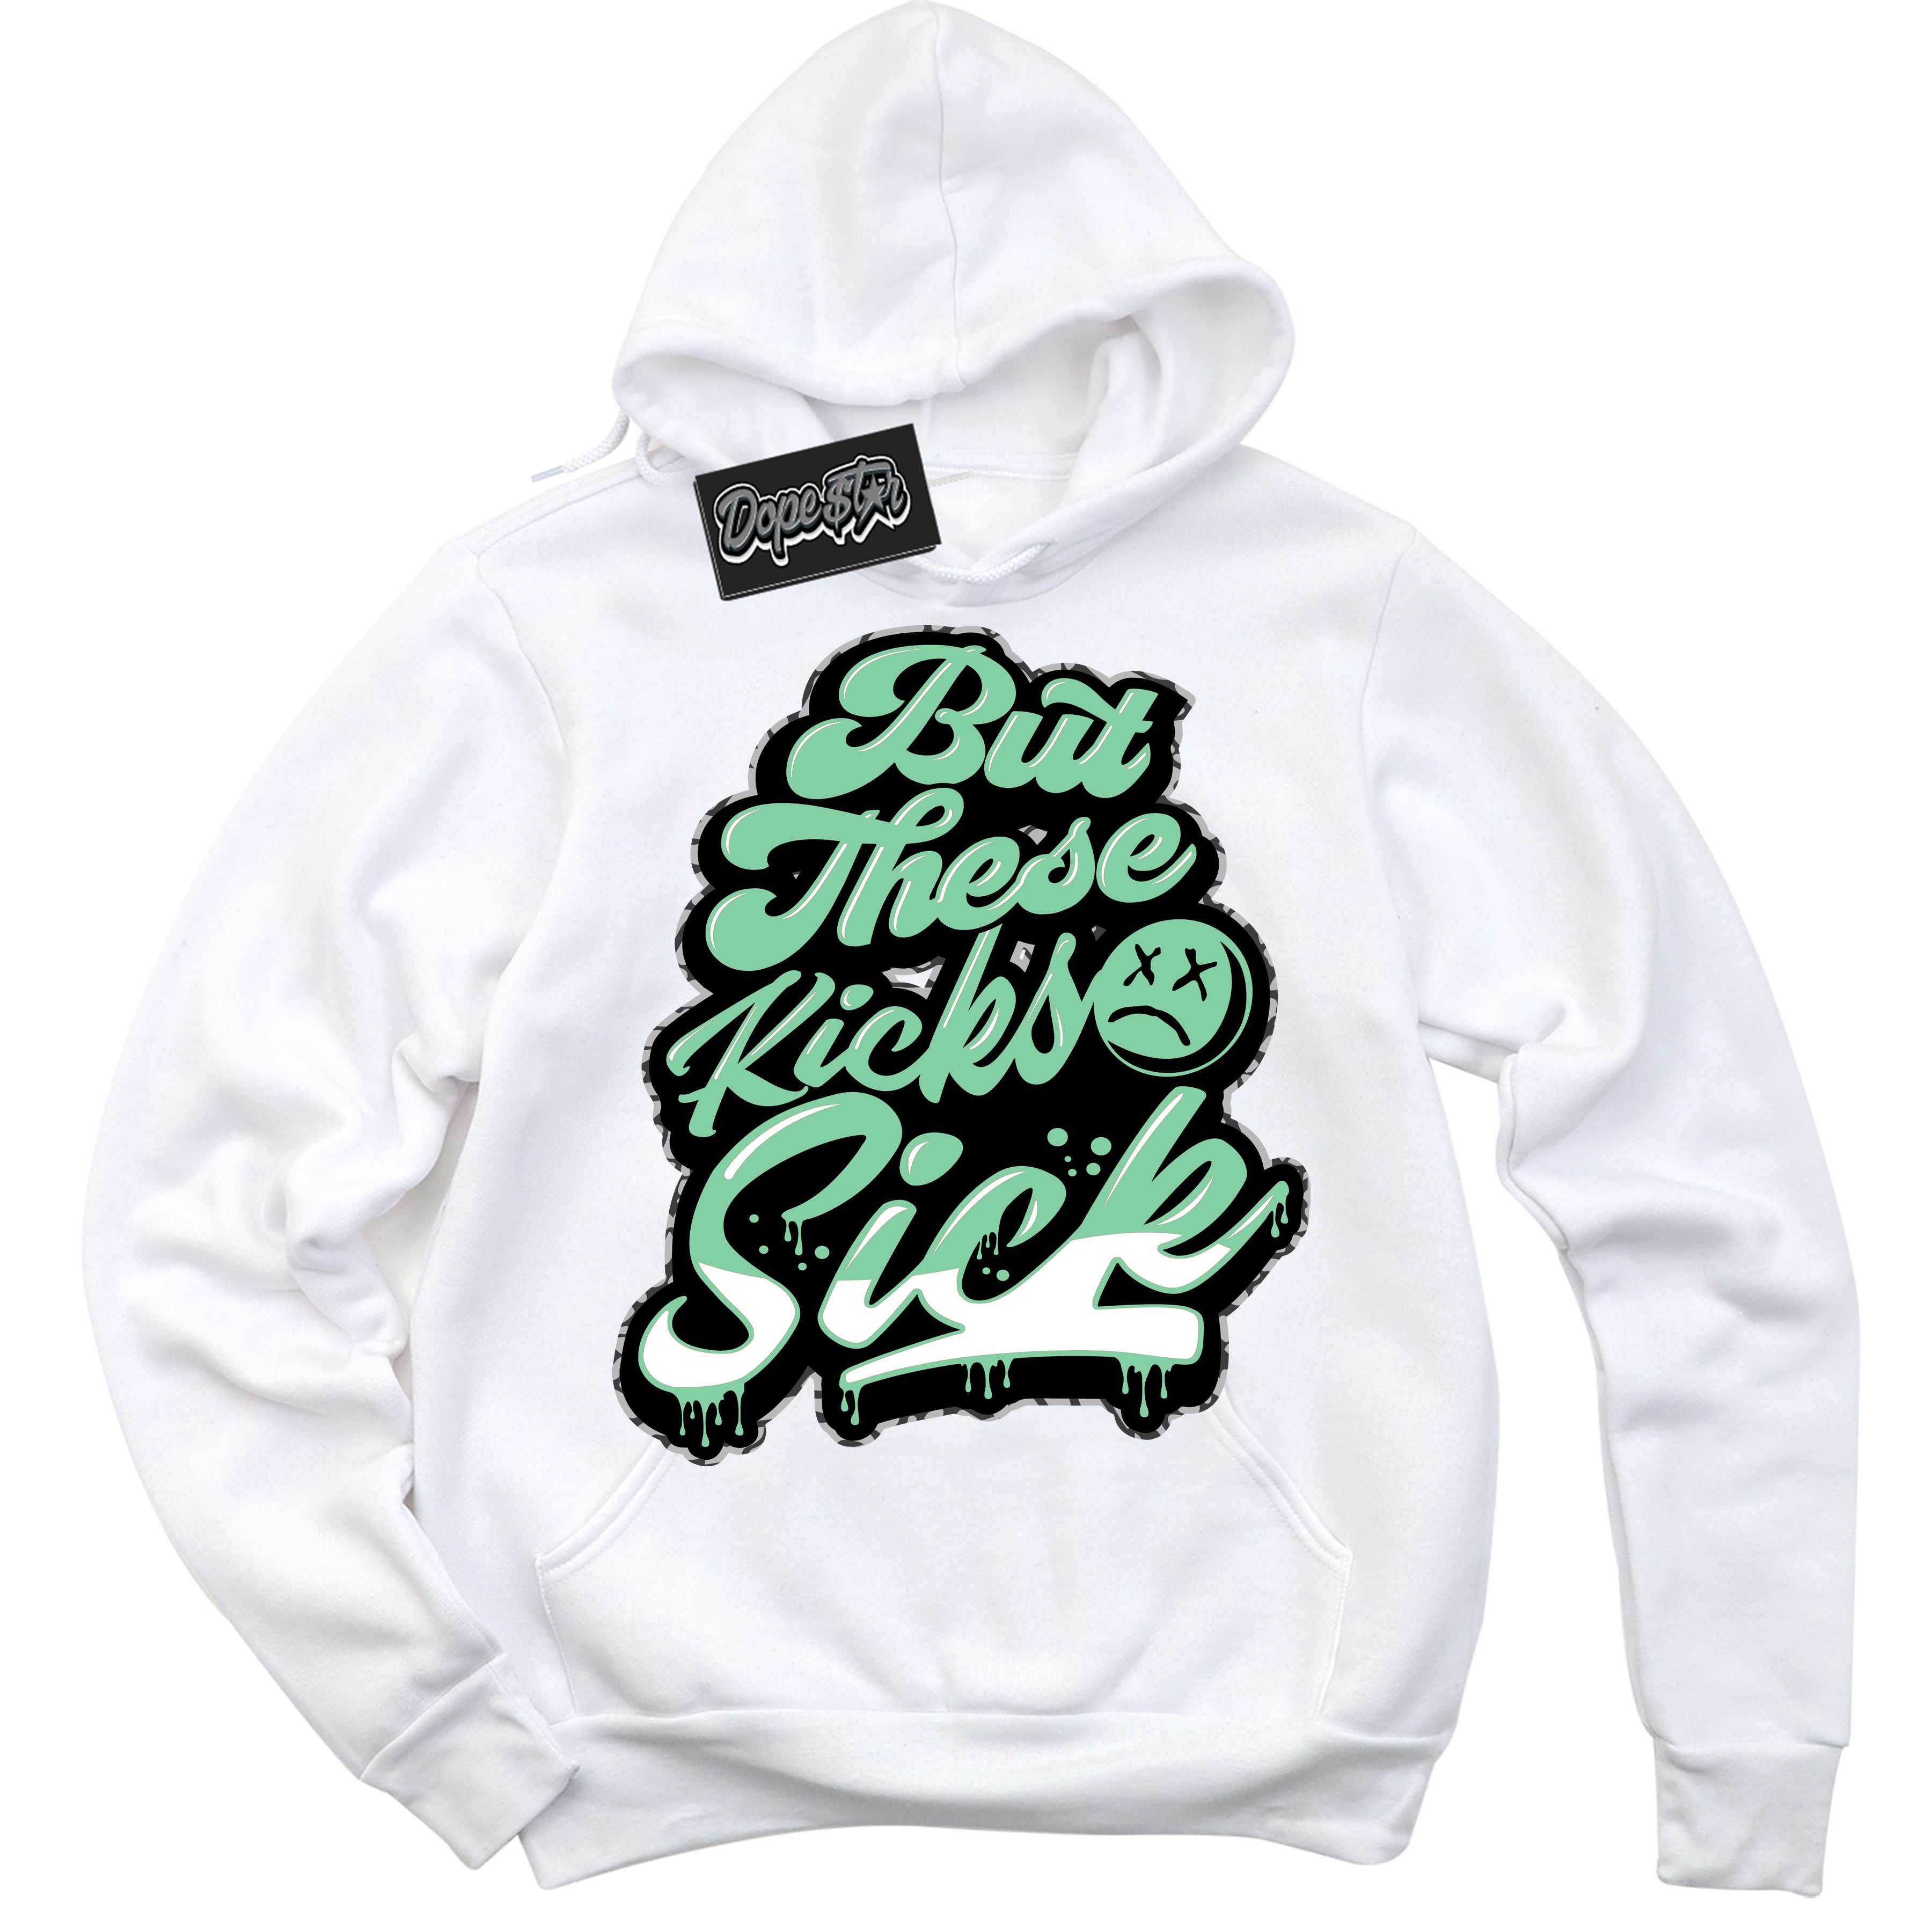 Cool White Graphic DopeStar Hoodie with “ Kick Sick “ print, that perfectly matches Green Glow 3s sneakers